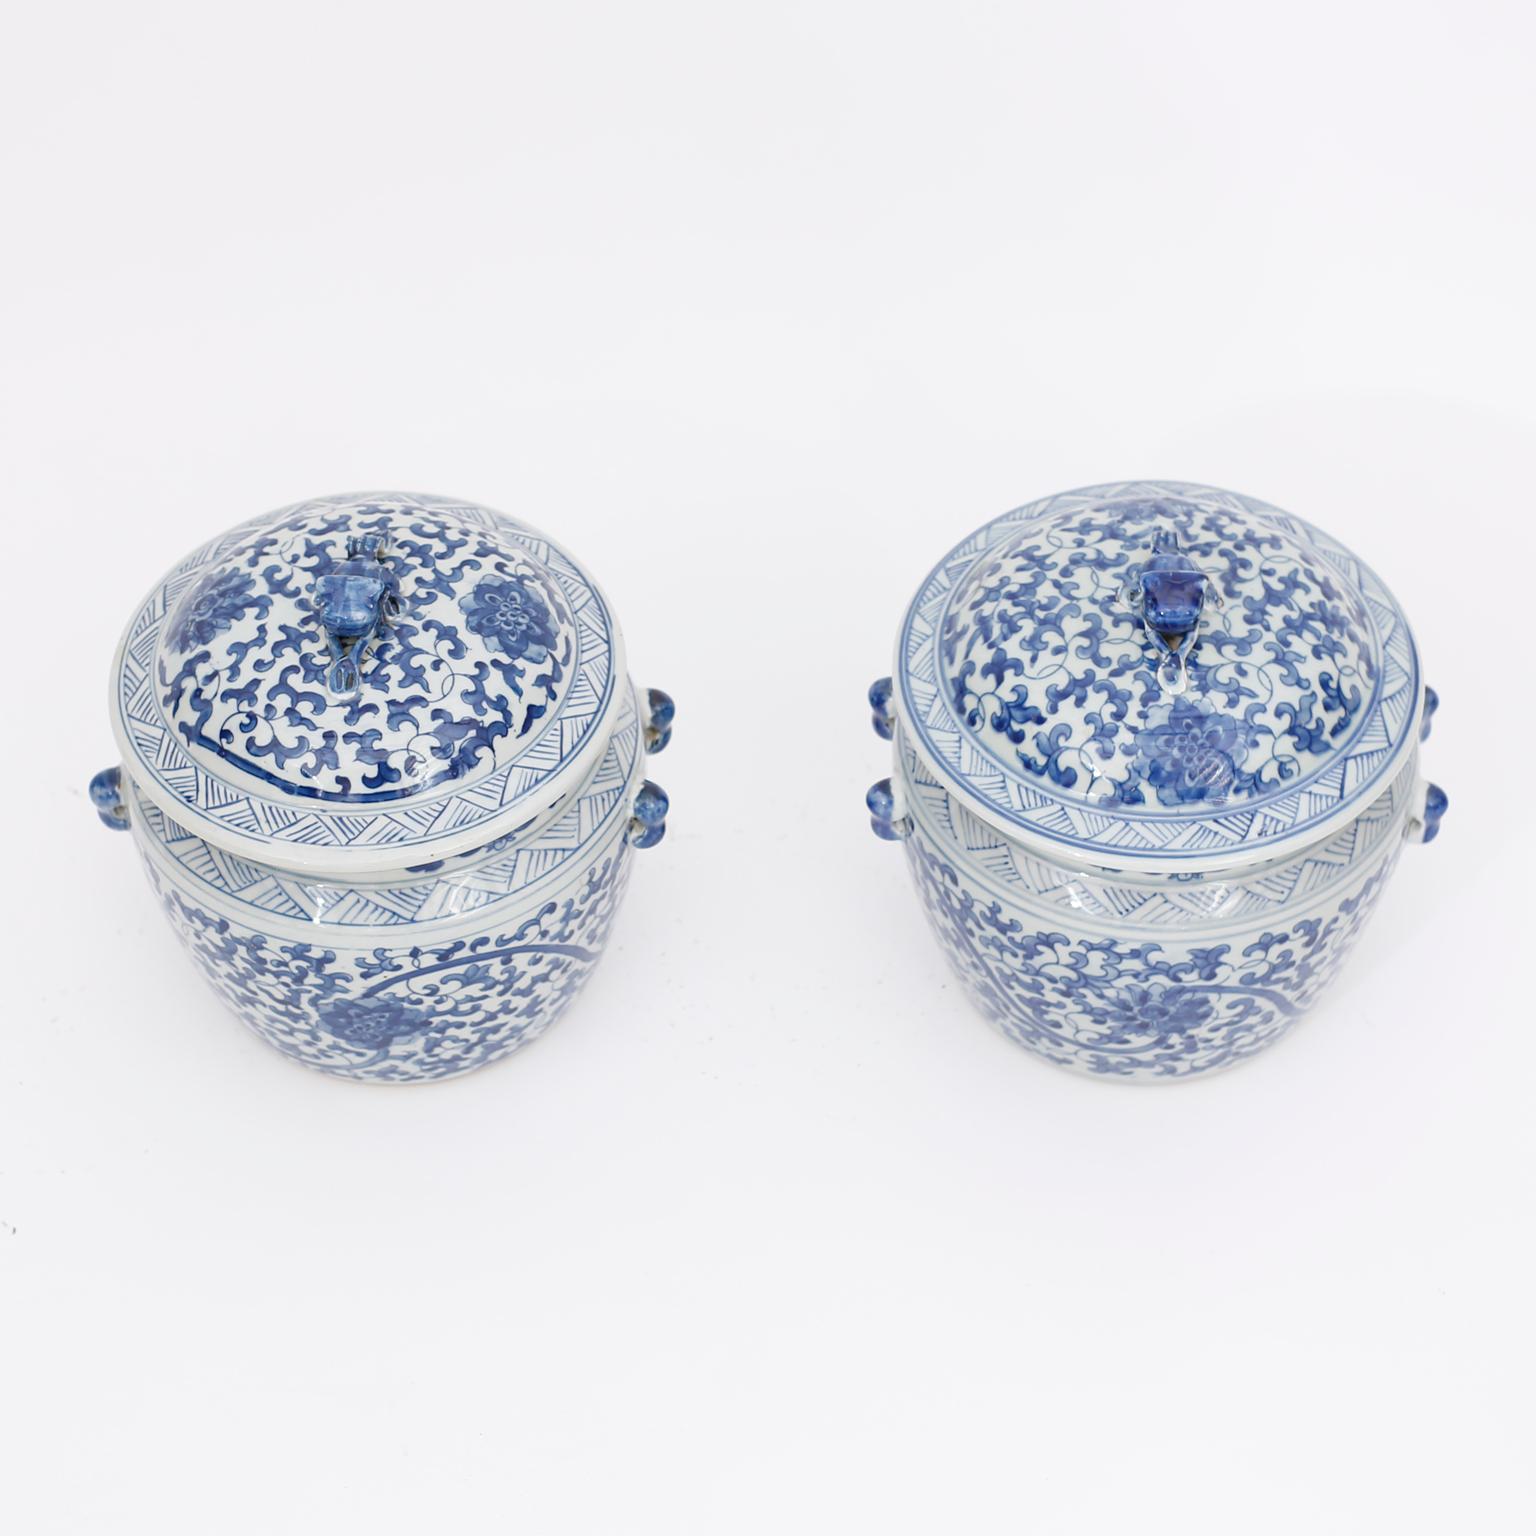 Pair of Chinese blue and white porcelain lidded jars or pots hand decorated, in the Chinese Export manner, with elaborate floral designs and animal handles on the lids.